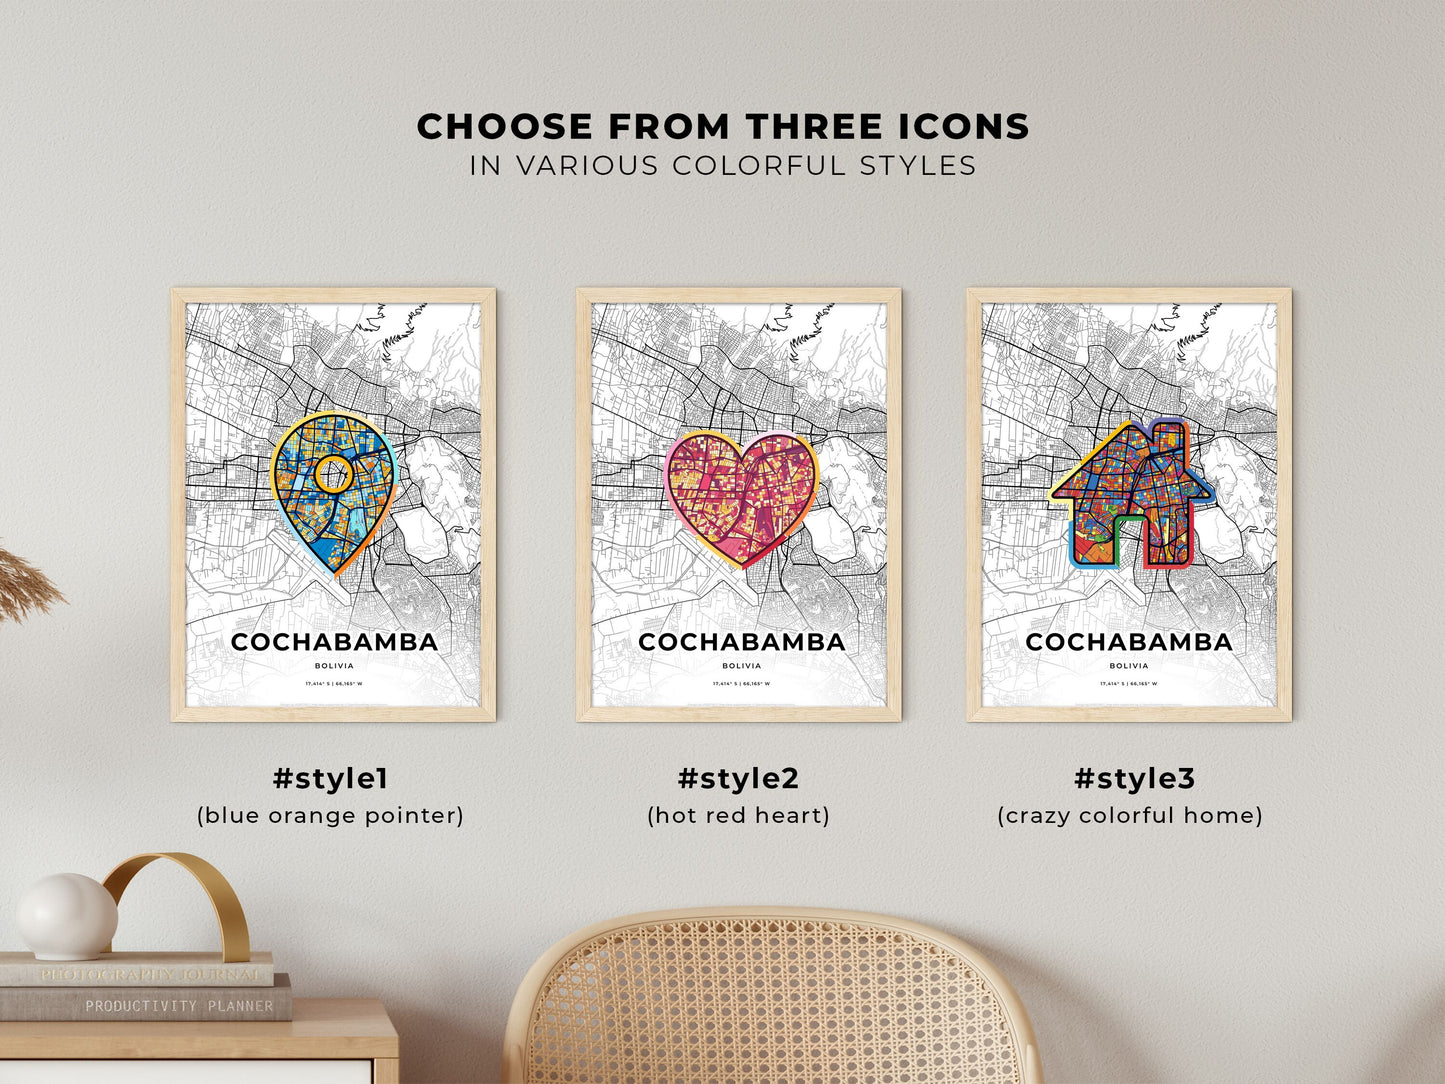 COCHABAMBA BOLIVIA minimal art map with a colorful icon. Where it all began, Couple map gift.